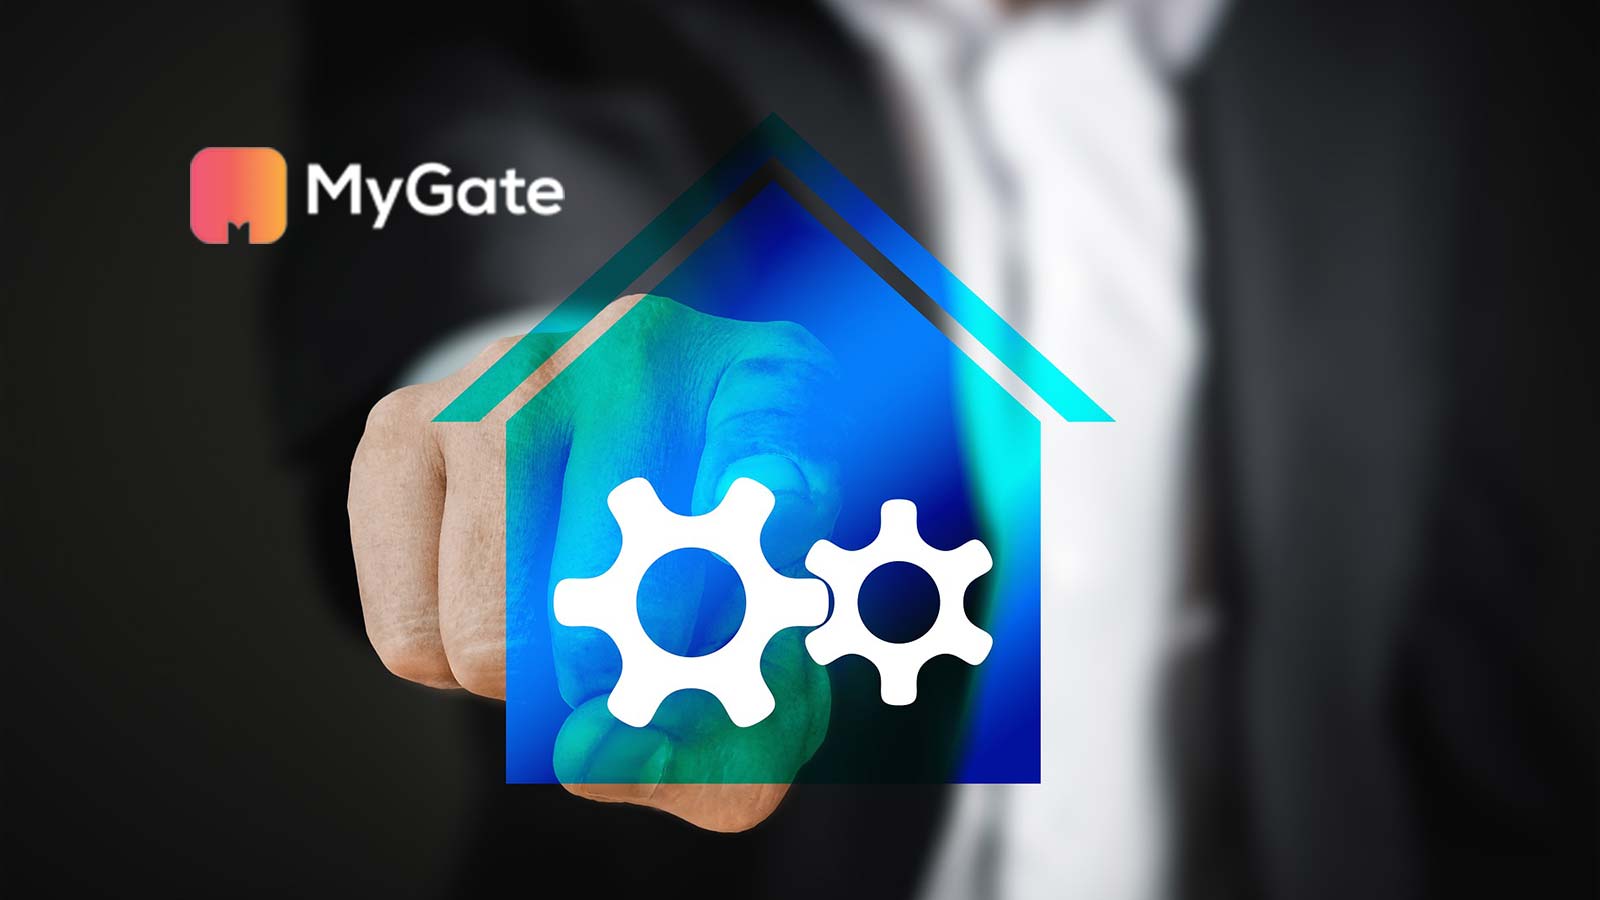 MyGate: A Mobile App For Gated Communities - YouTube